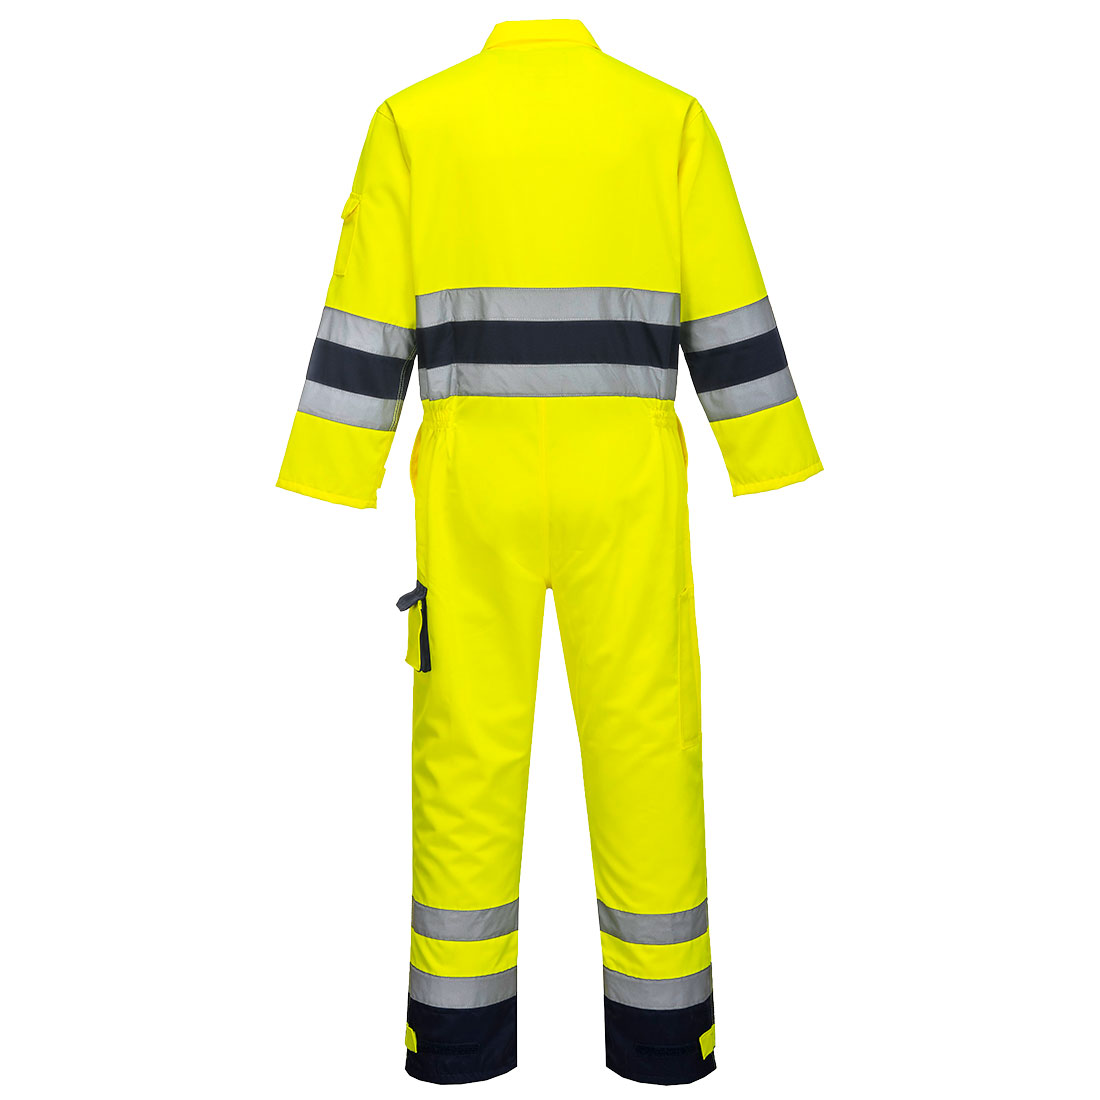 Portwest Hi Vis Polycotton Coverall Overall Reflective Safety Work Yellow E042 